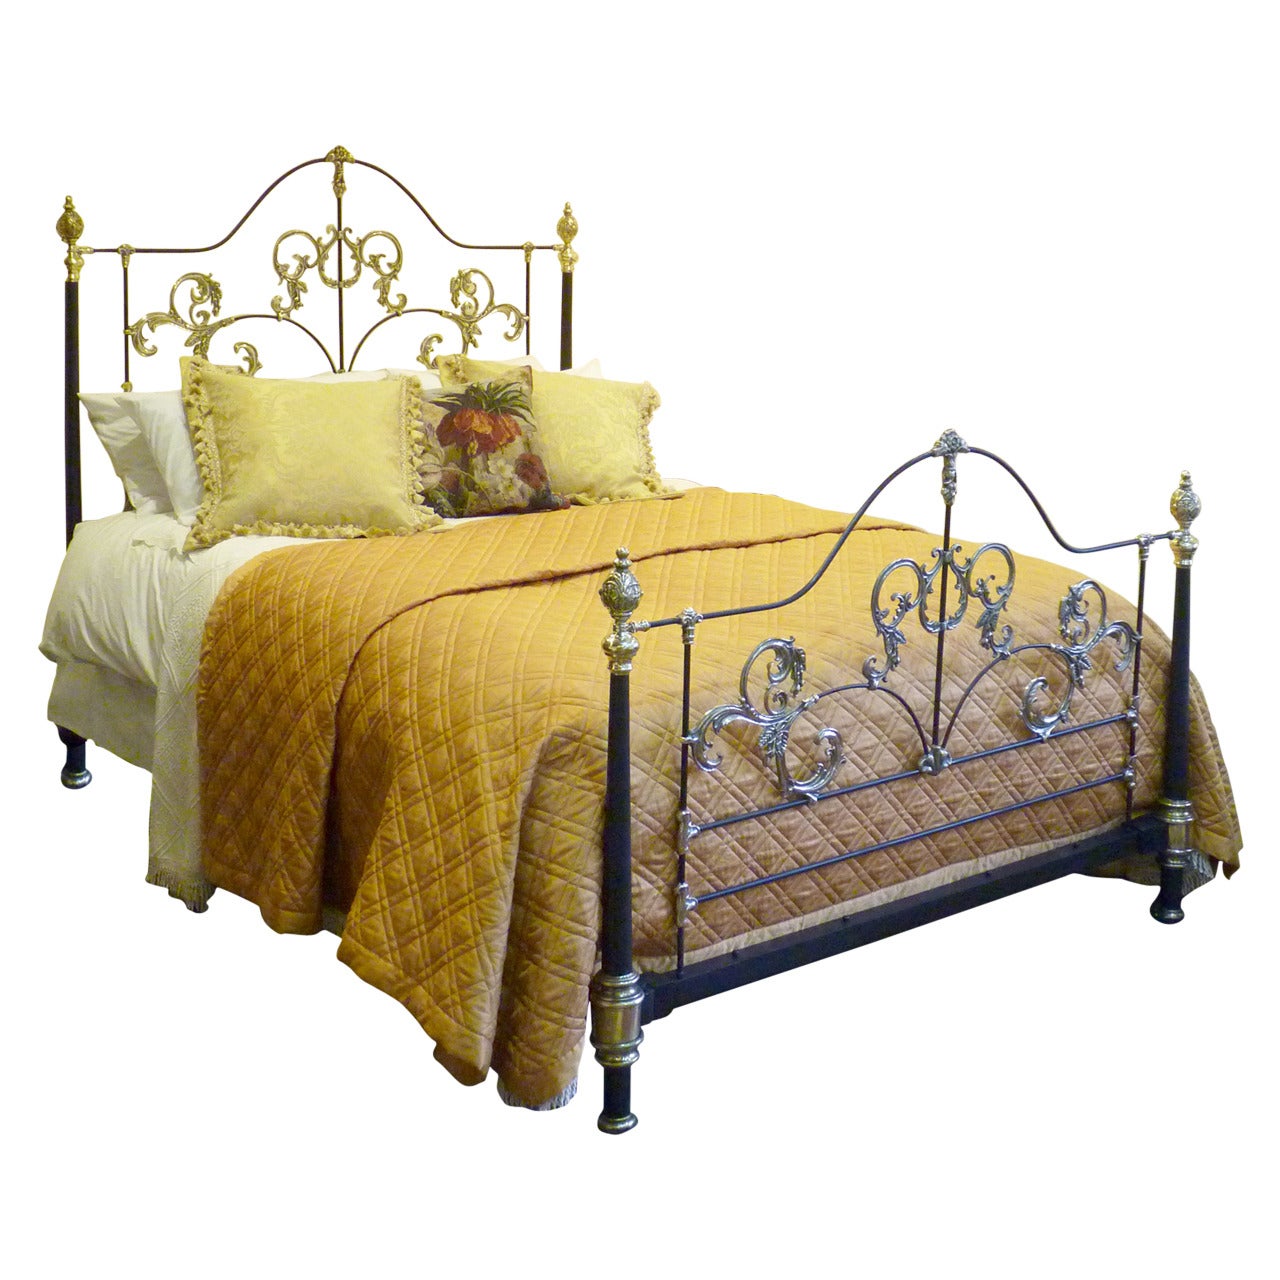 Cast Brass and Iron Bed